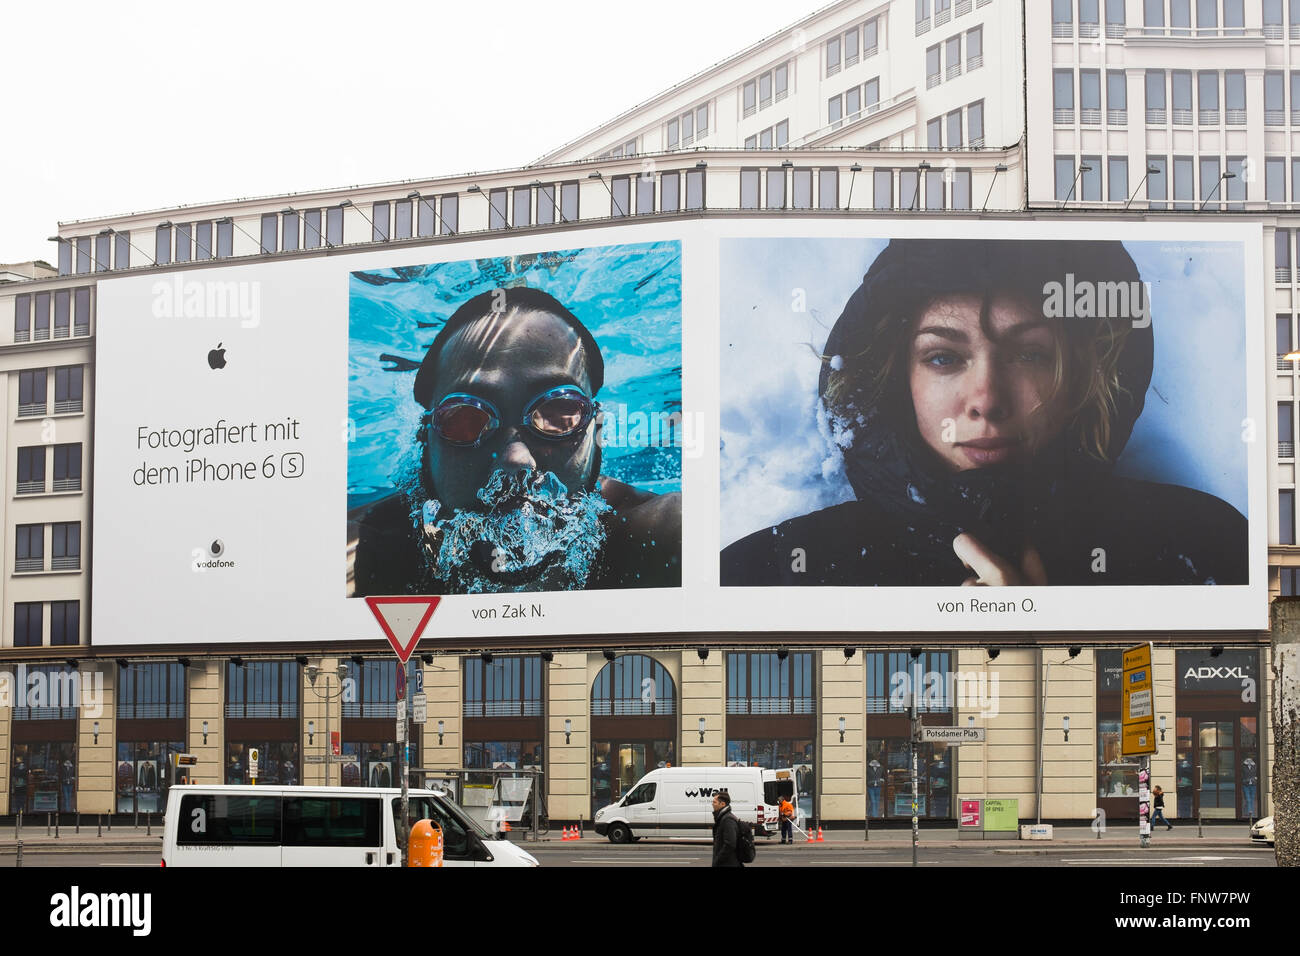 BERLIN, 11 MARCH: Huge bill board advertising panel for iPhone 6S covering a building under construction in Potsdamer Platz in B Stock Photo